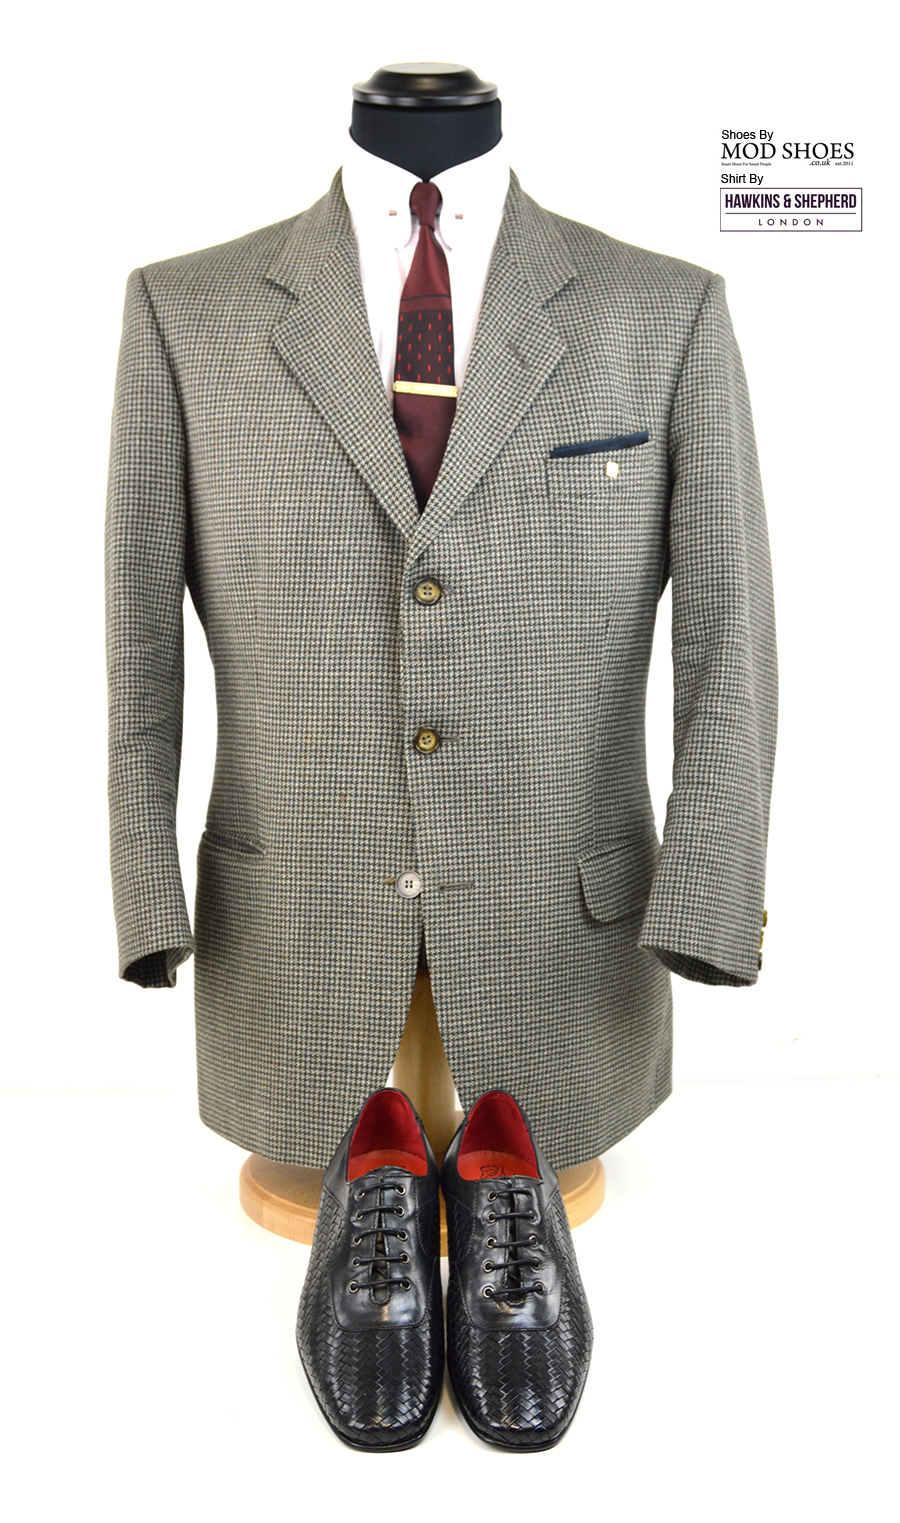 modshoes-weavers-with-mod-suit-and-hawkins-sherped-shirt